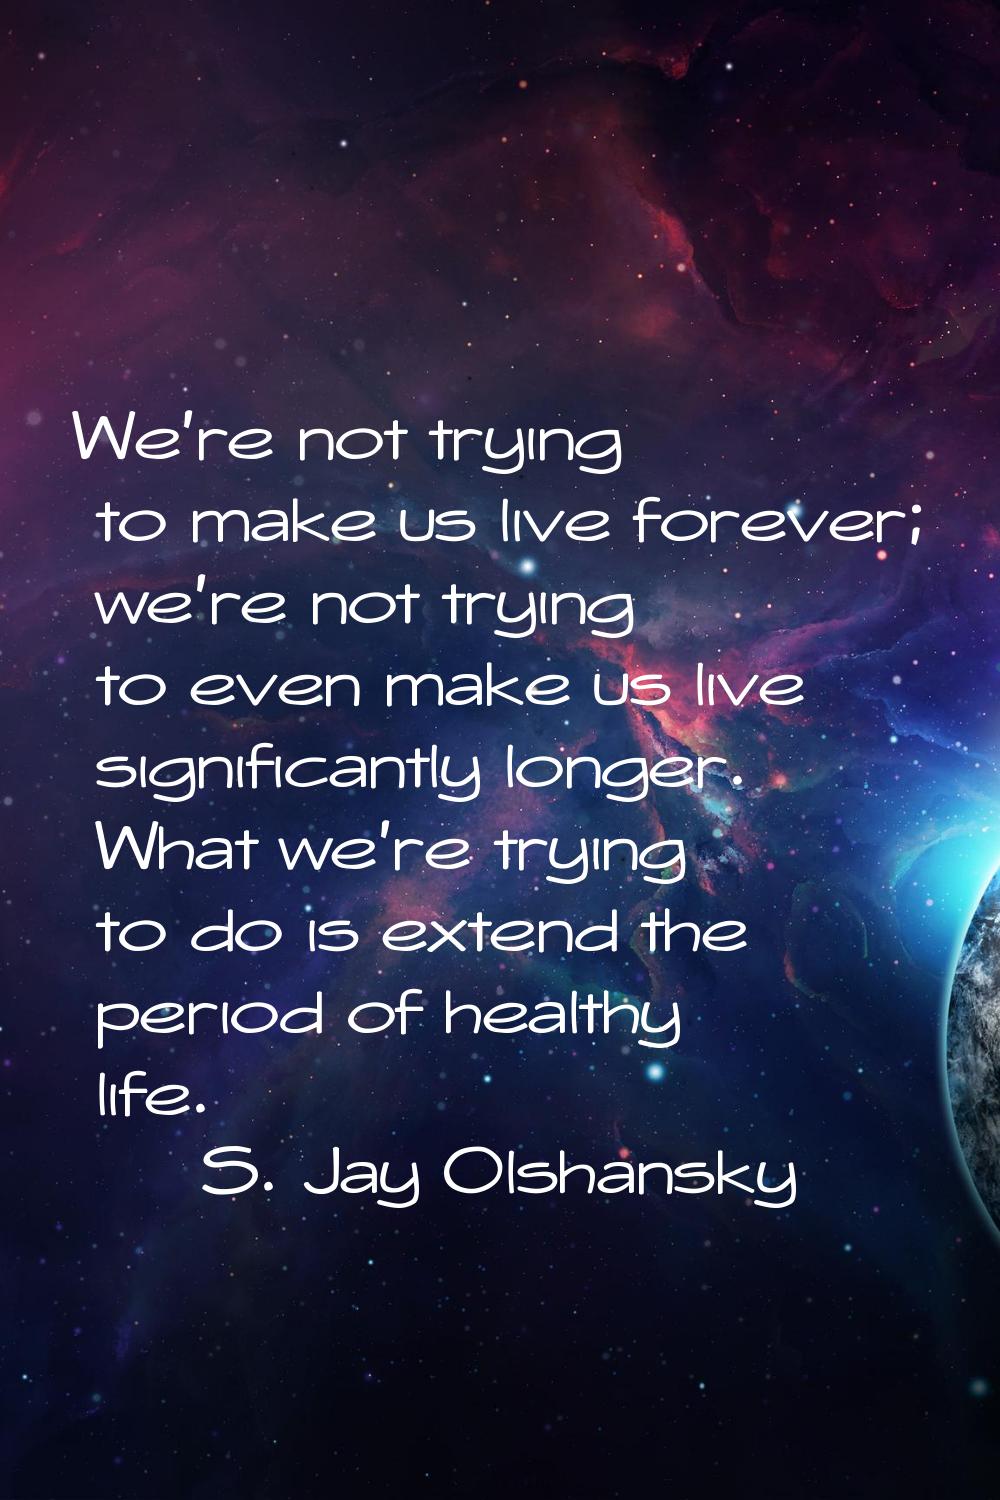 We're not trying to make us live forever; we're not trying to even make us live significantly longe